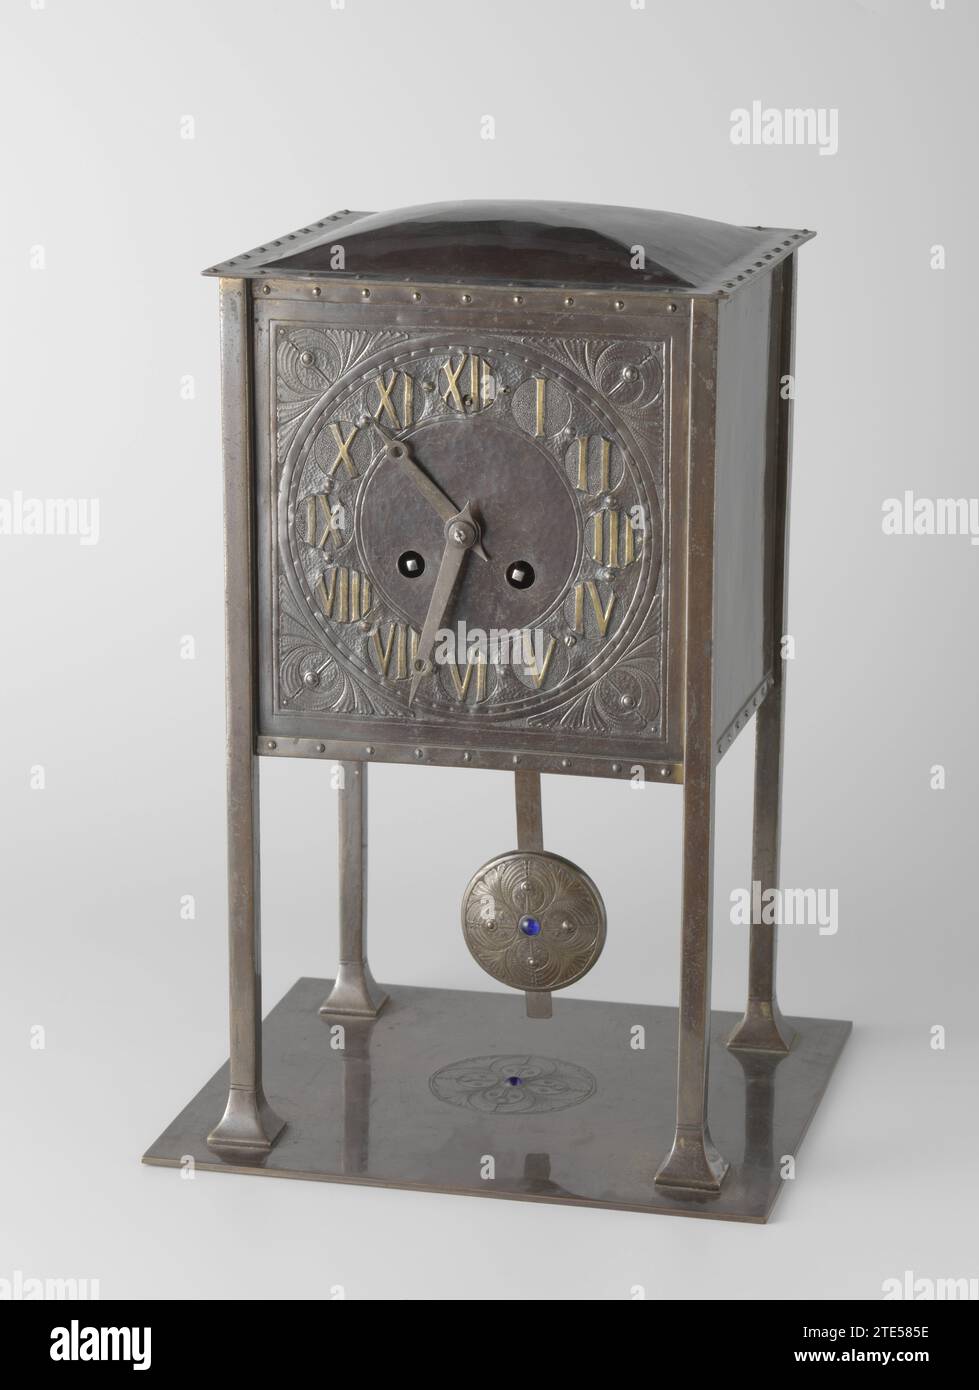 Pendula van Messing, firm under the Sint-Maarten, c. 1905 Pendulum from brass, square with a roof, on four legs that rest on a square plate. Decorated dial. Round sling plate and in the middle of the base plate decorated with blue stone. Furniture Worker: Zaltbommeldesigner: Netherlands designer: Netherlands brass (alloy) Pendulum from brass, square with a roof, on four legs that rest on a square plate. Decorated dial. Round sling plate and in the middle of the base plate decorated with blue stone. Furniture Worker: Zaltbommeldesigner: Netherlands designer: Netherlands brass (alloy) Stock Photo